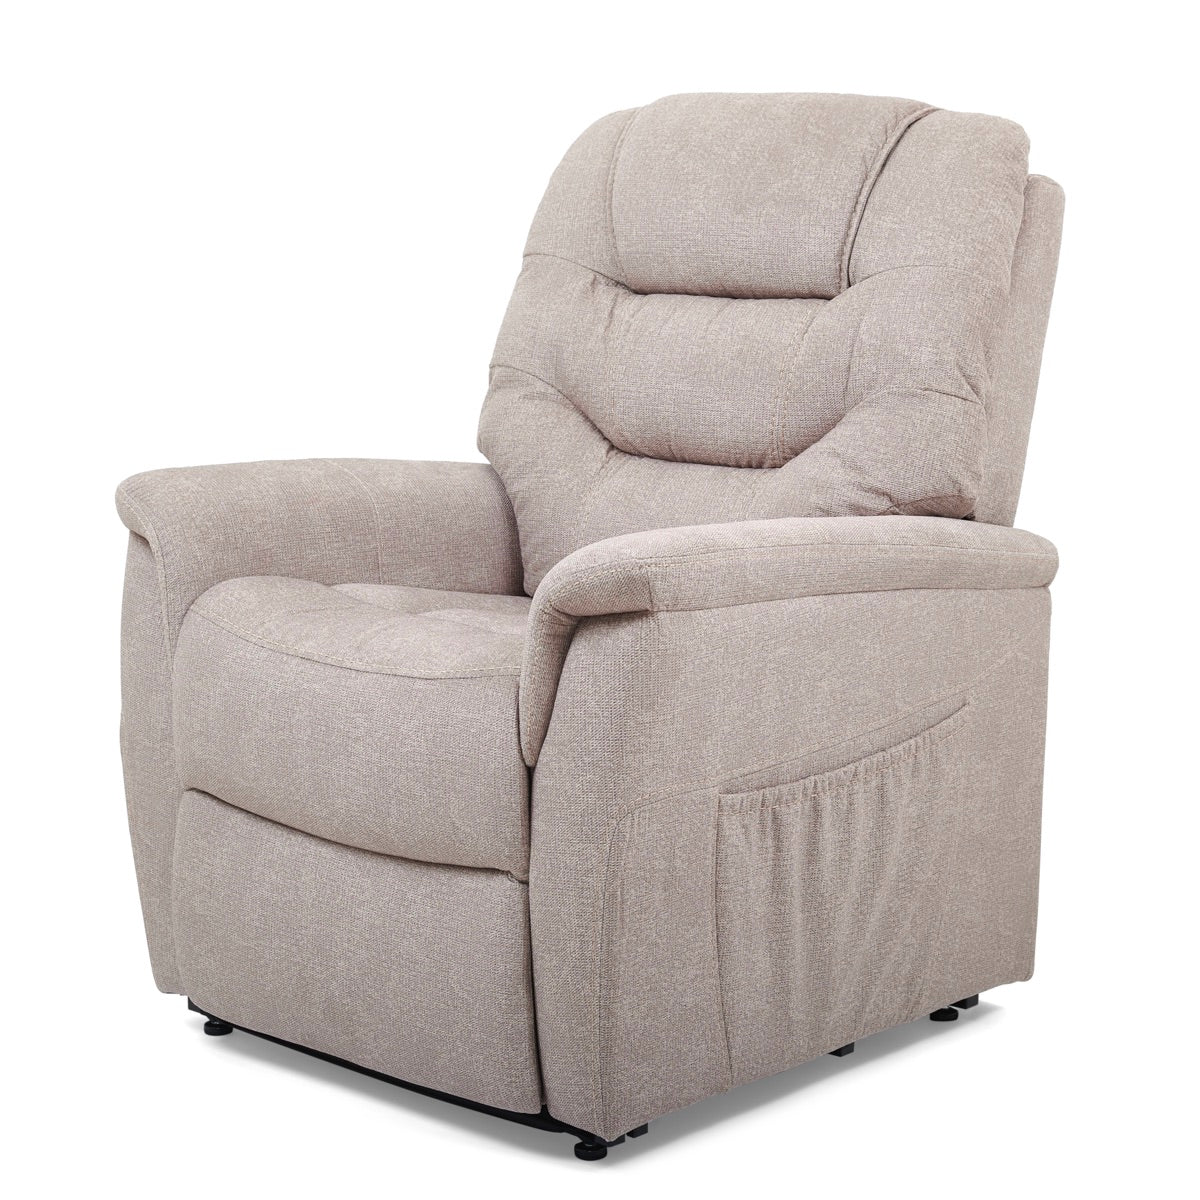 Marabella Power Lift Chair Recliner, seated angle, antler fabric